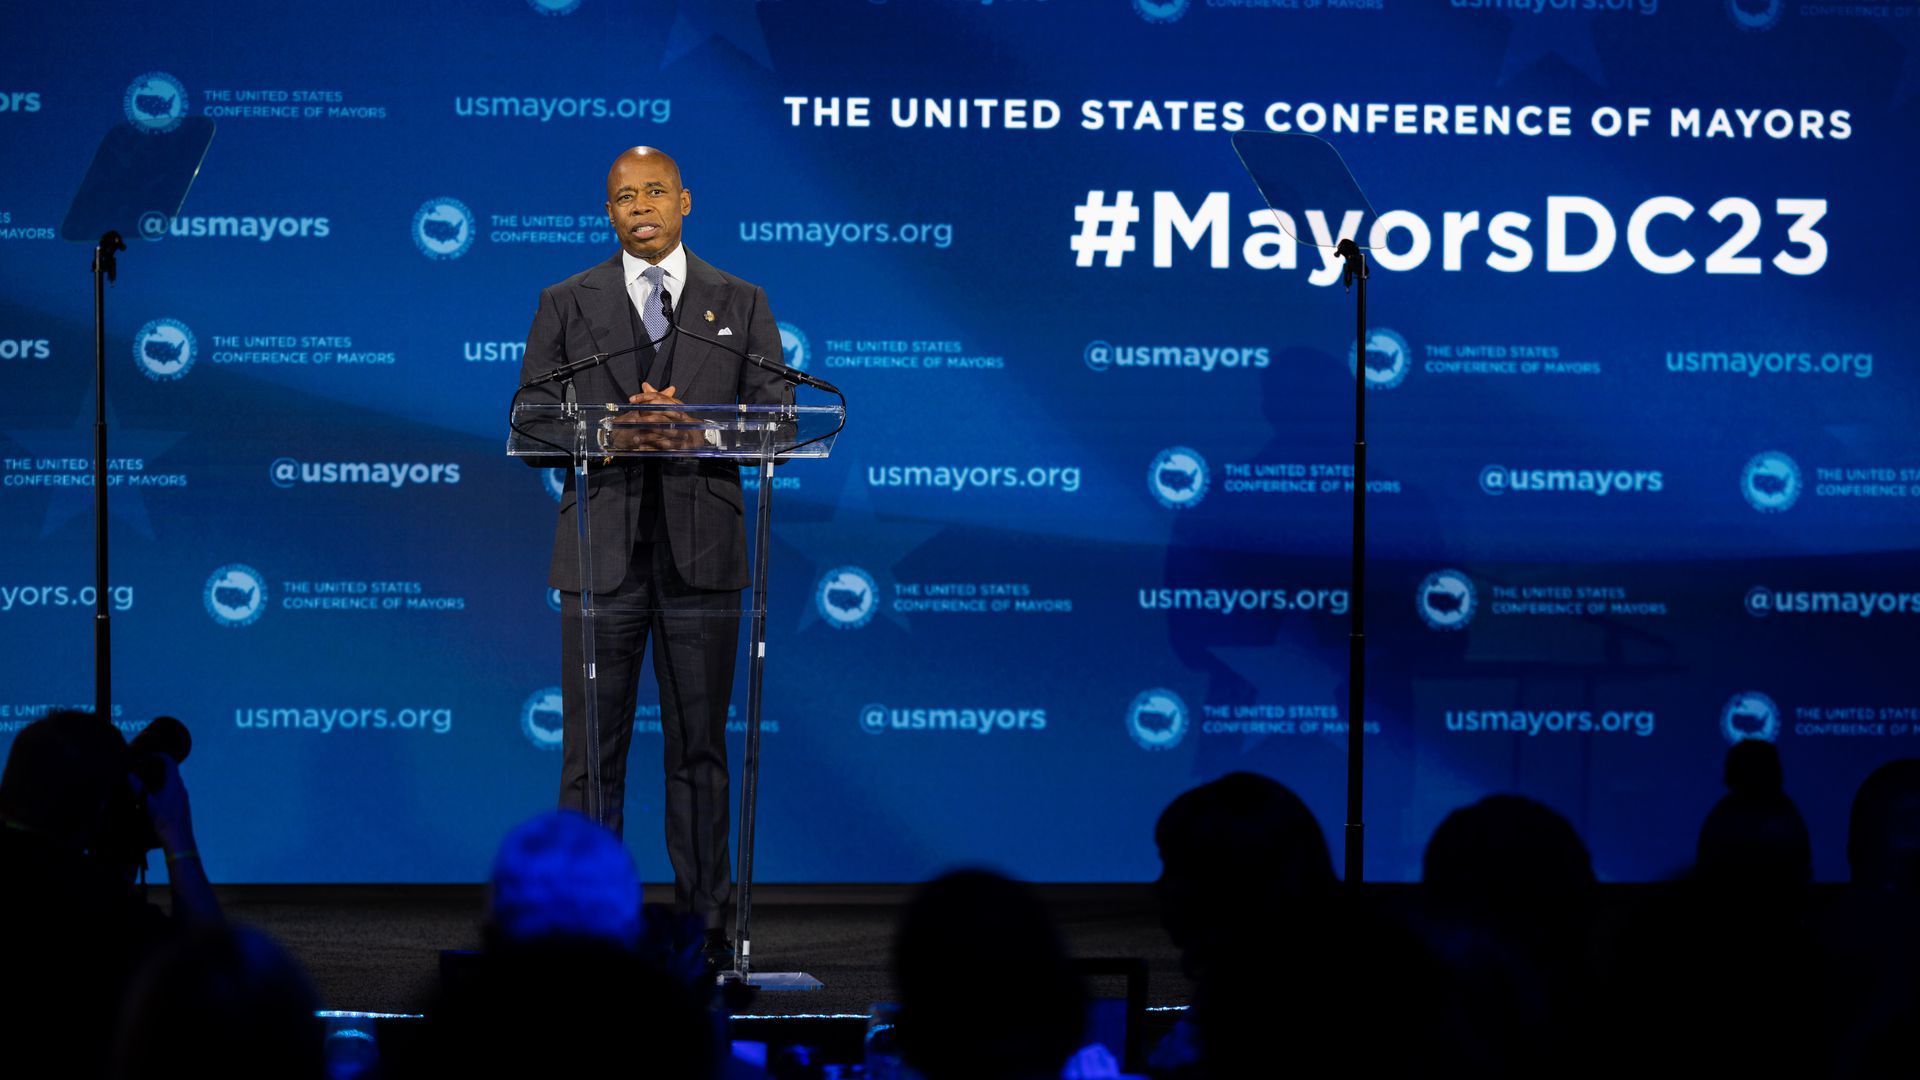  New York City Mayor Eric Adams outlined an agenda for immigration reform at the U.S. Conference of Mayors' winter meeting in Washington, D.C.